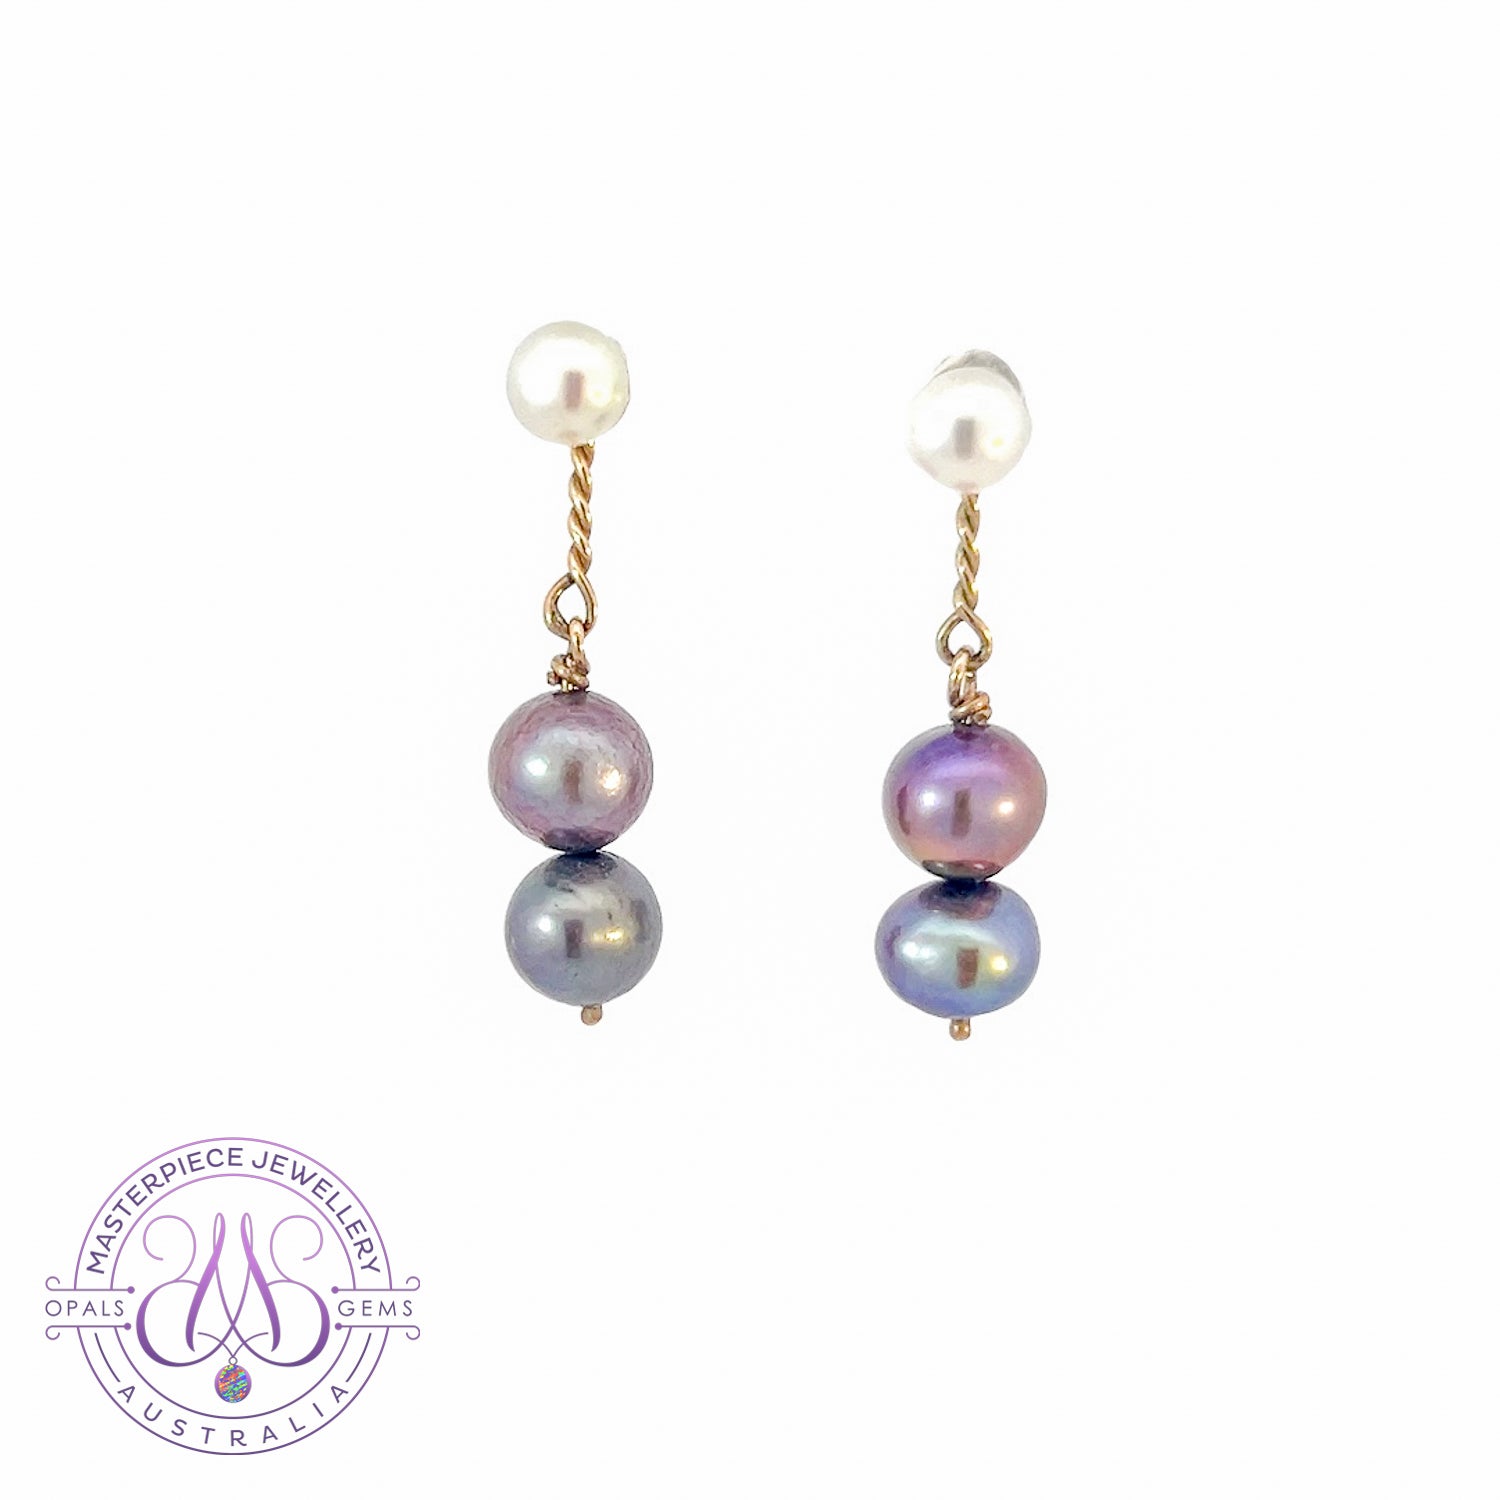 14kt White and Yellow Gold dangling White and Black Pearl earrings - Masterpiece Jewellery Opal & Gems Sydney Australia | Online Shop